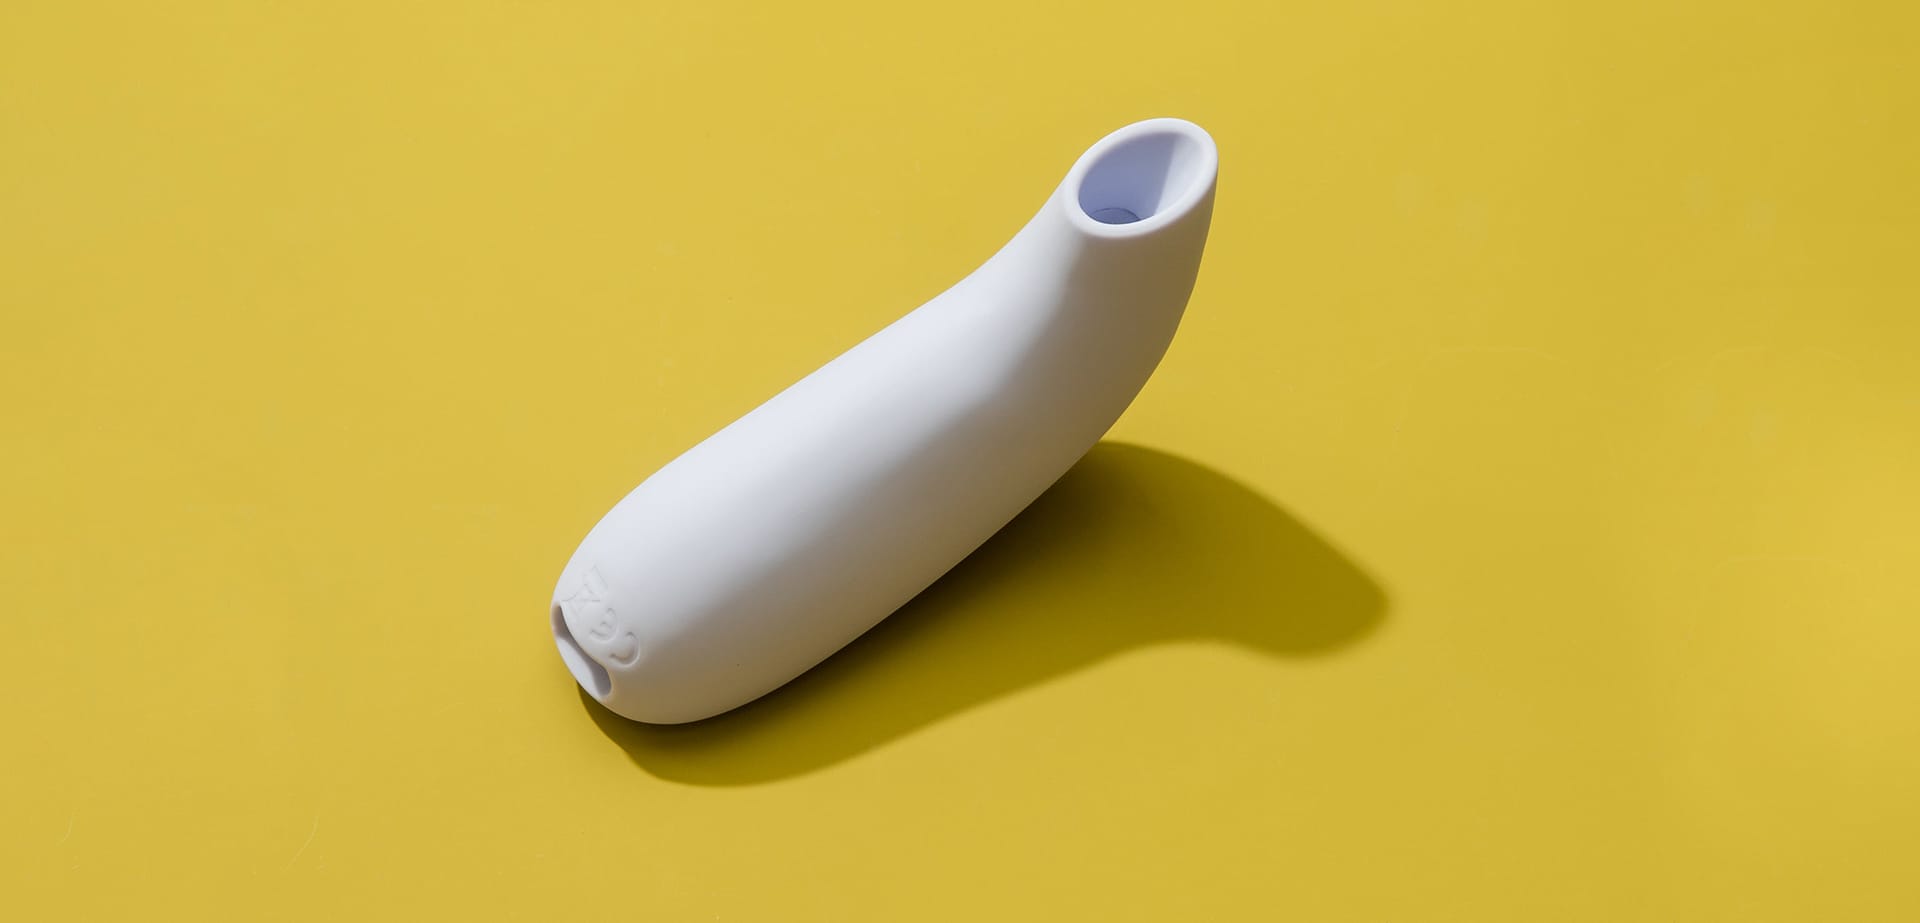 Suction Sex Toy.